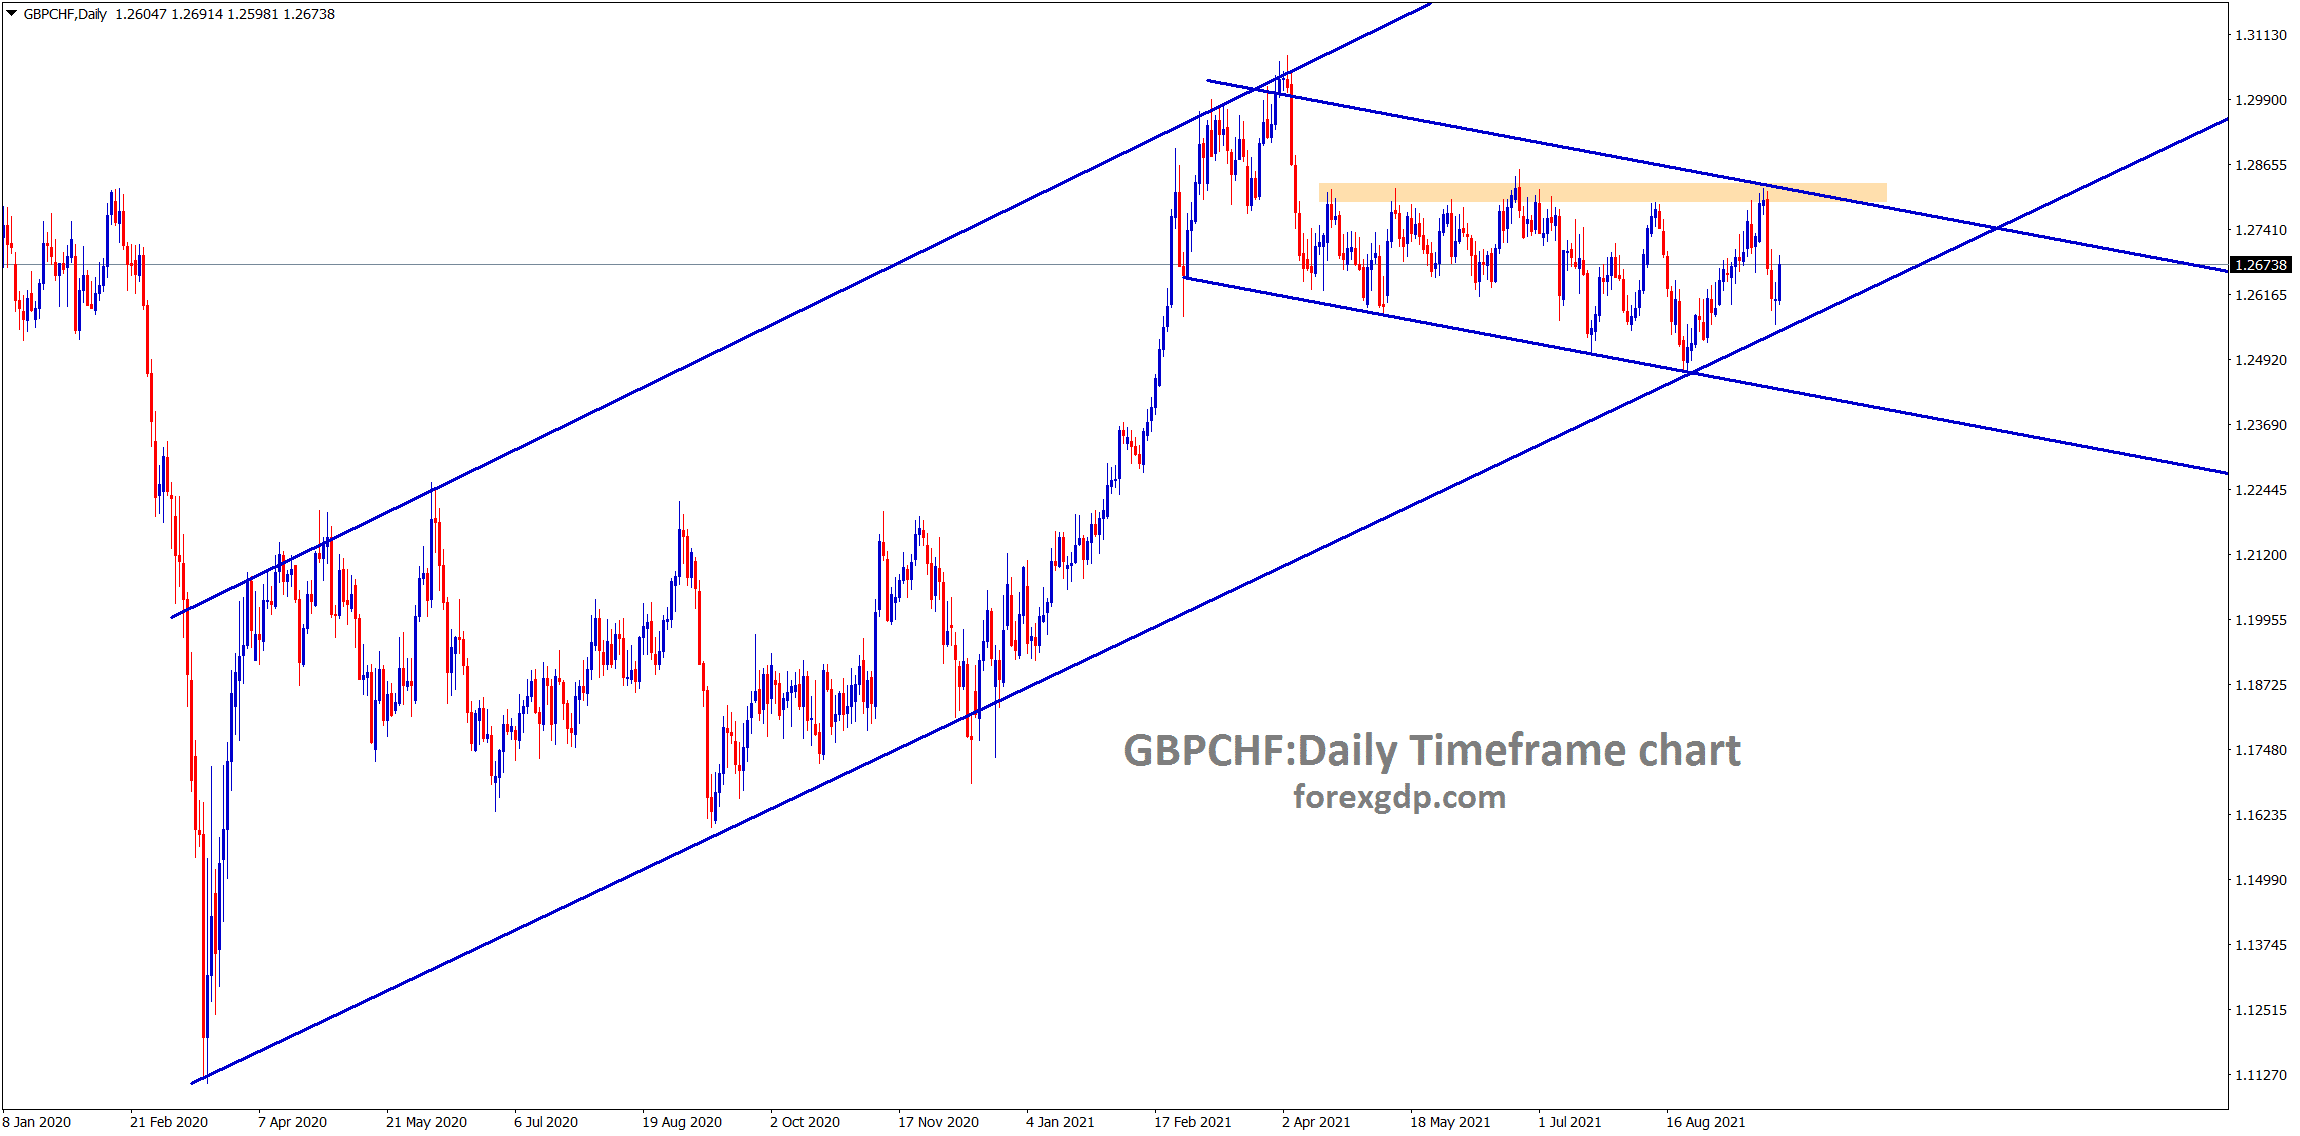 GBPCHF still moving in an uptrend and its consolidating now